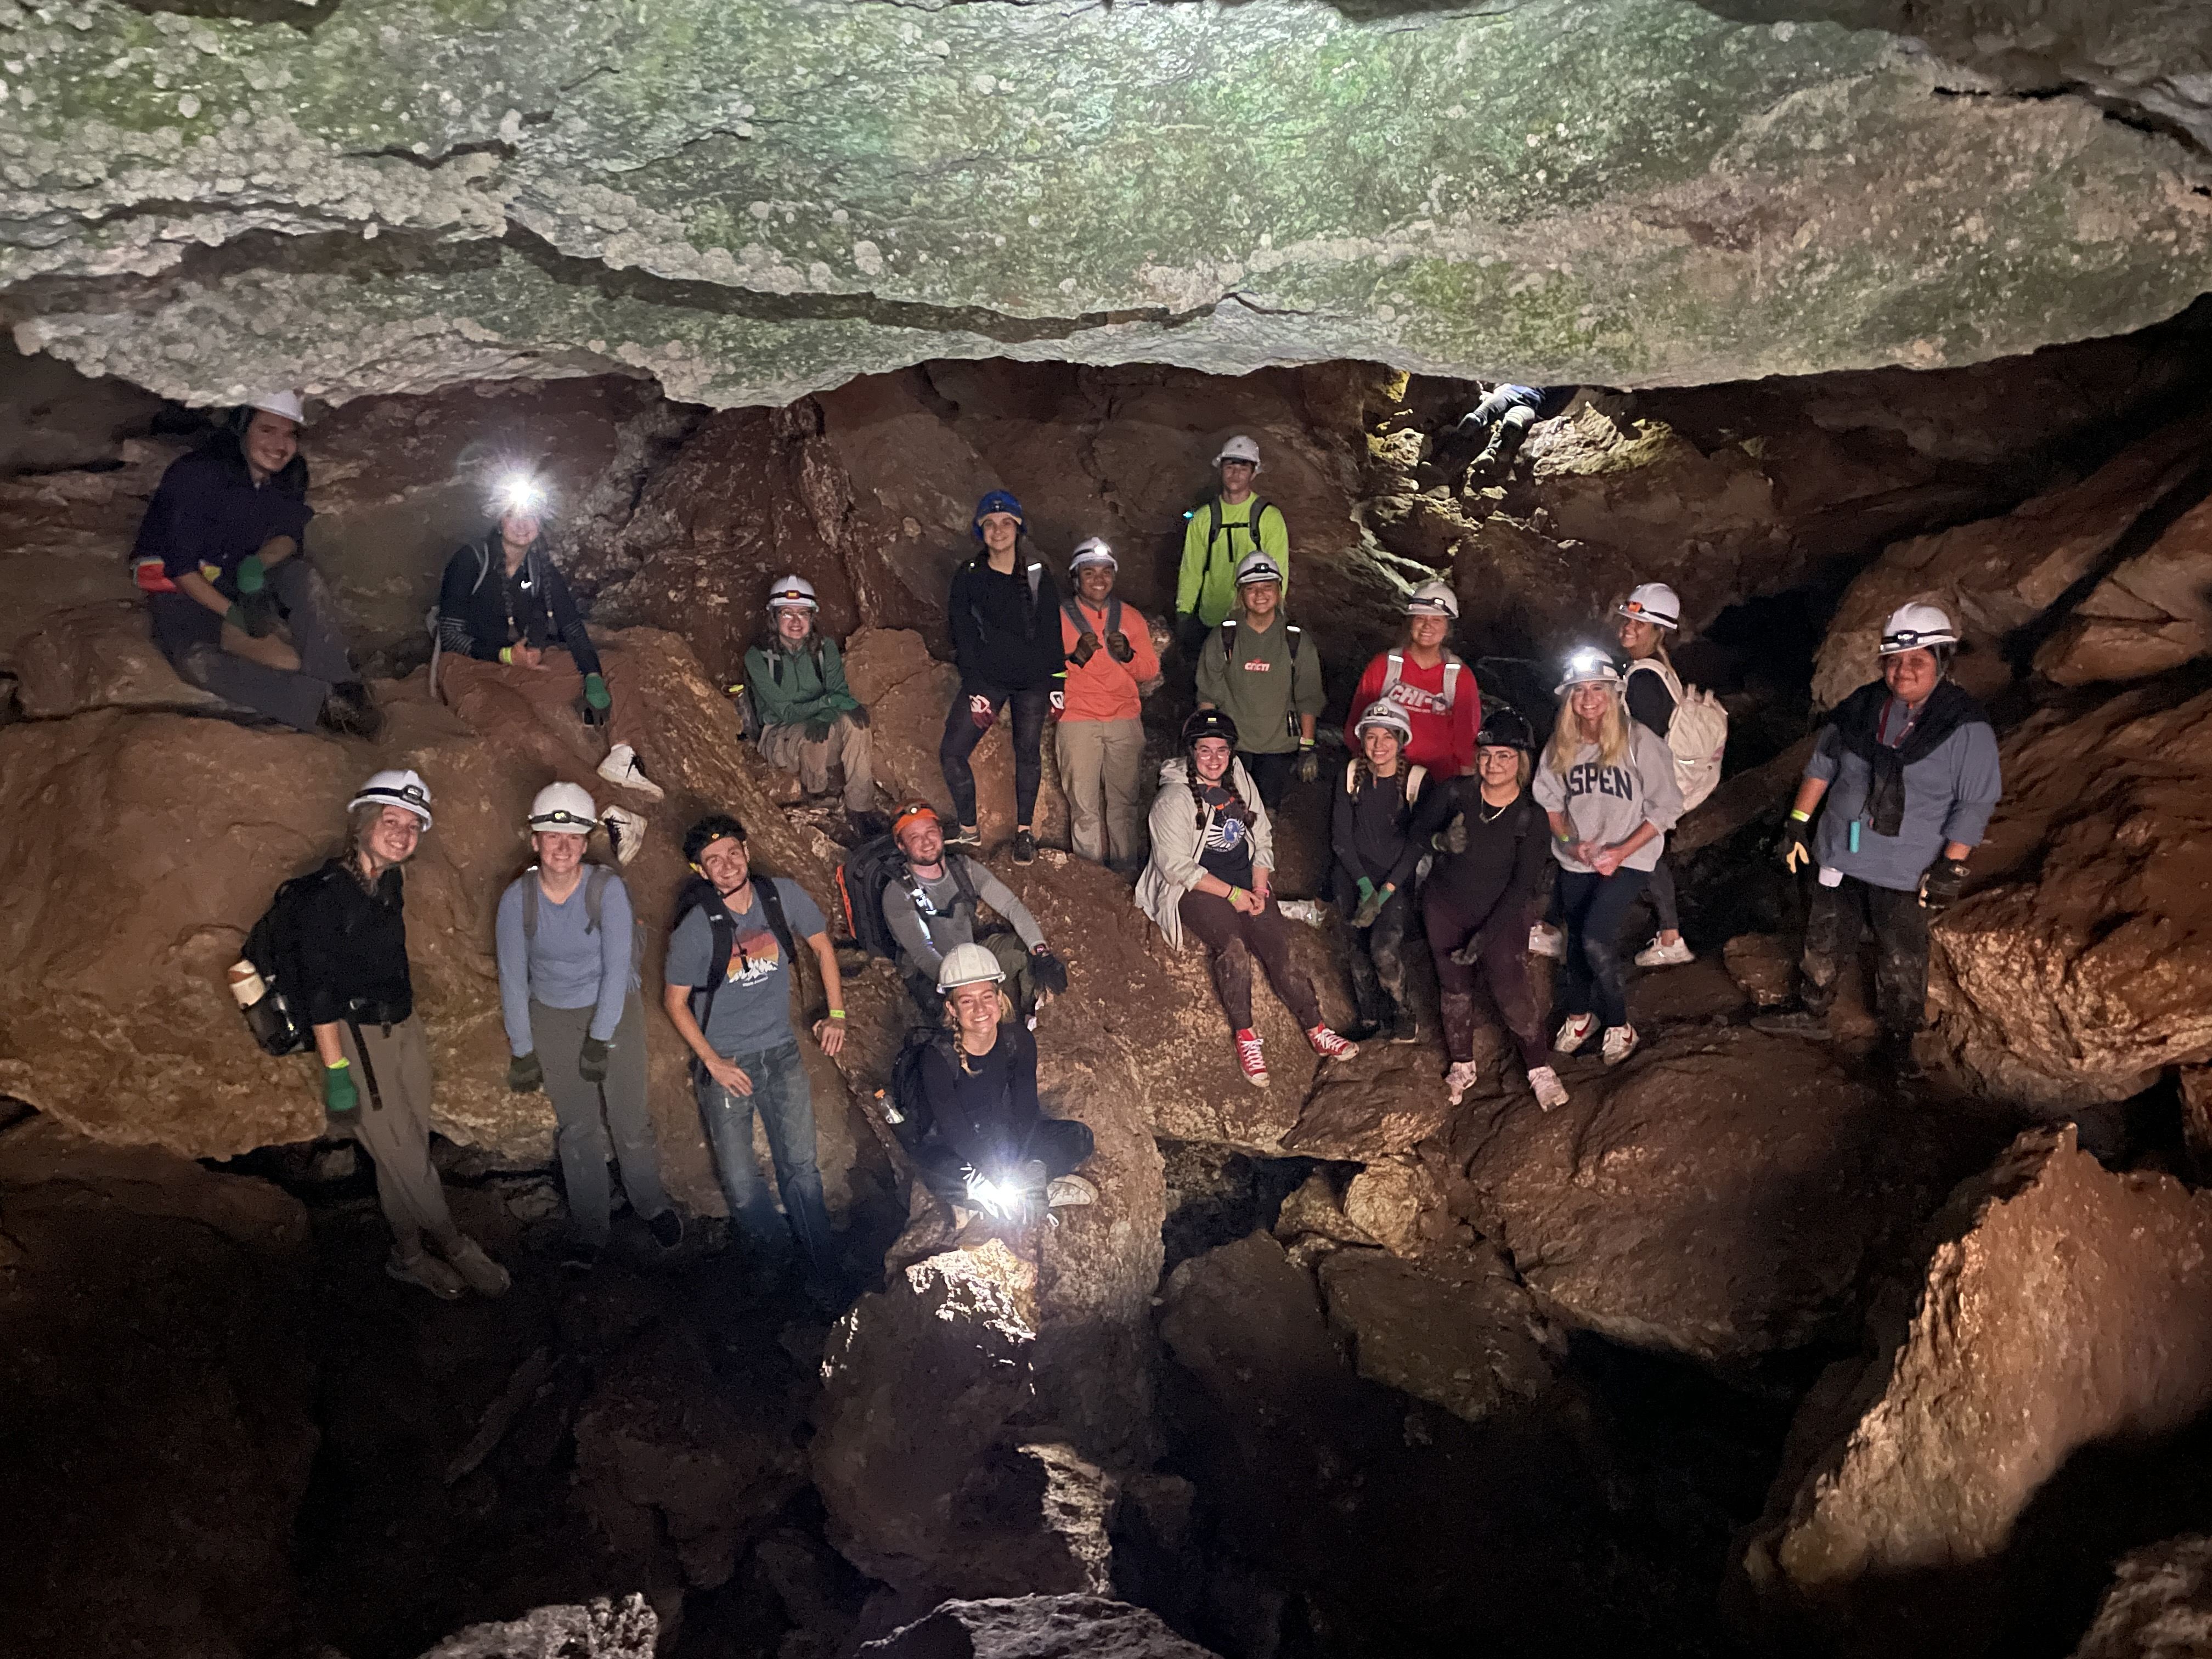 Students underground in a cave.